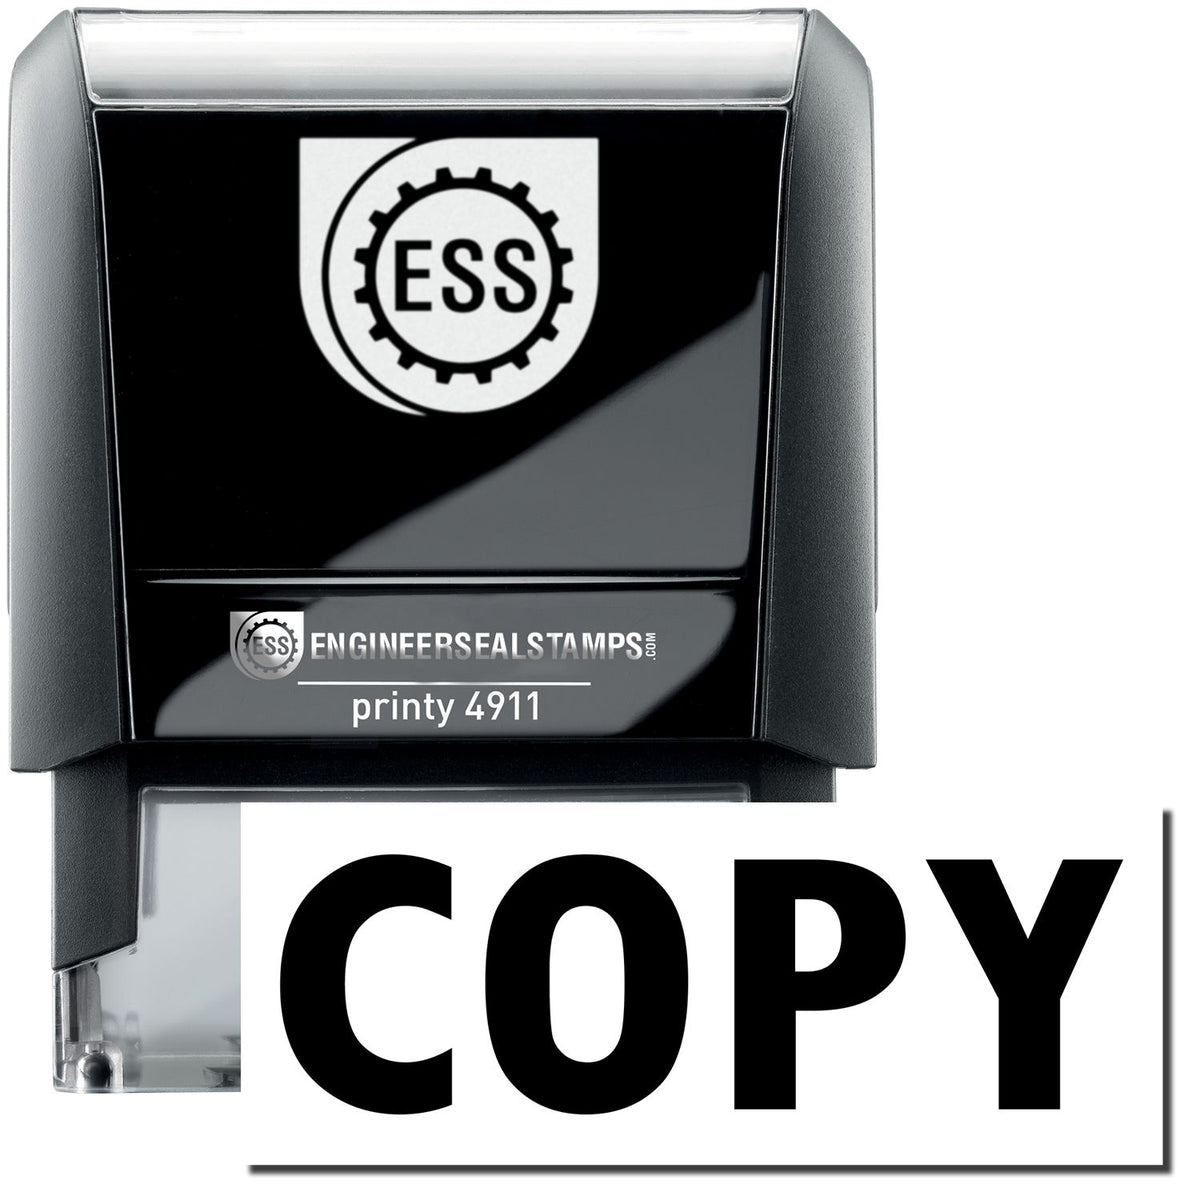 A self-inking stamp with a stamped image showing how the text &quot;COPY&quot; is displayed after stamping.